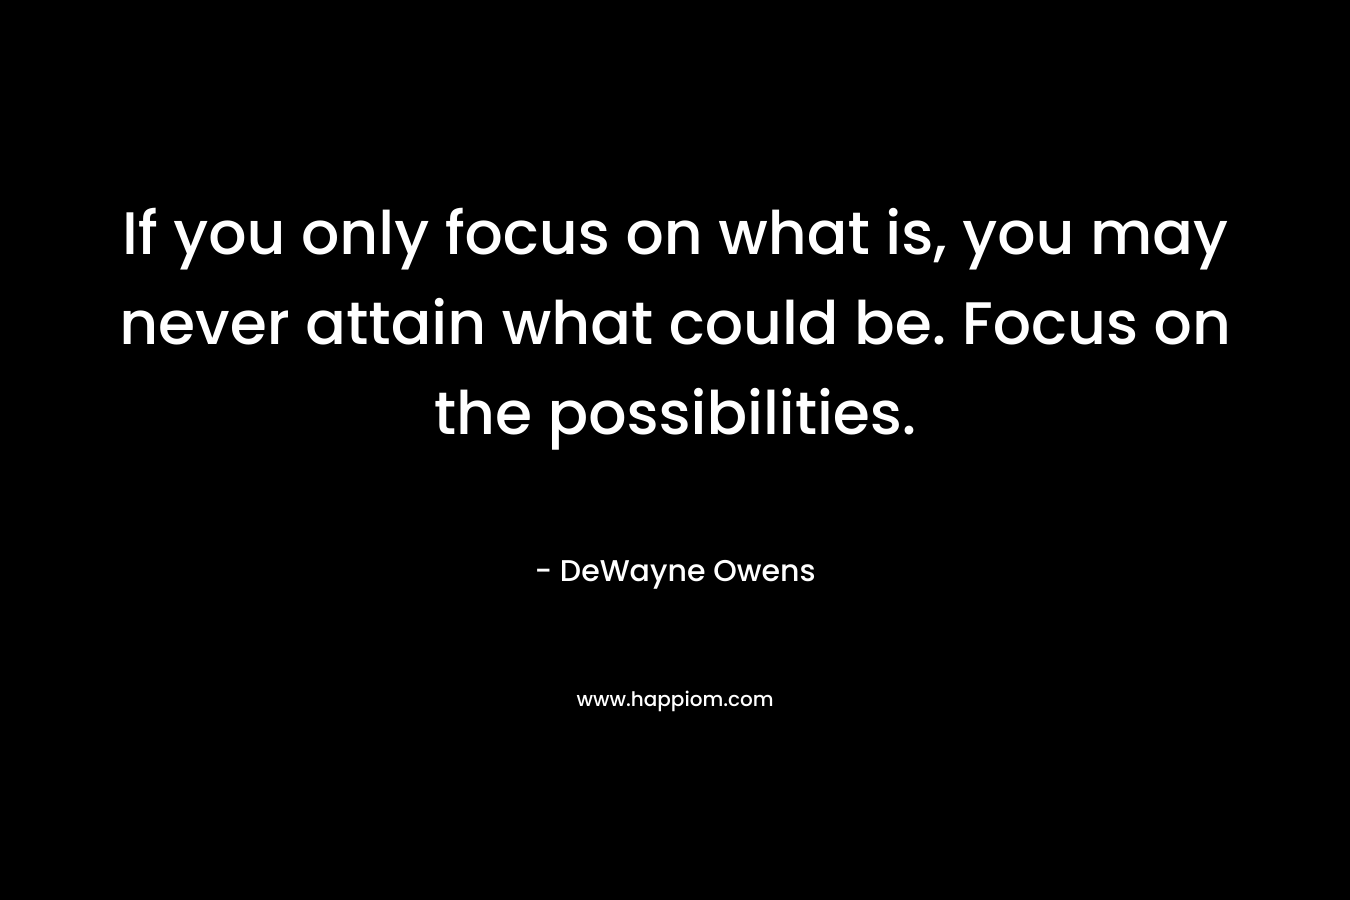 If you only focus on what is, you may never attain what could be. Focus on the possibilities.